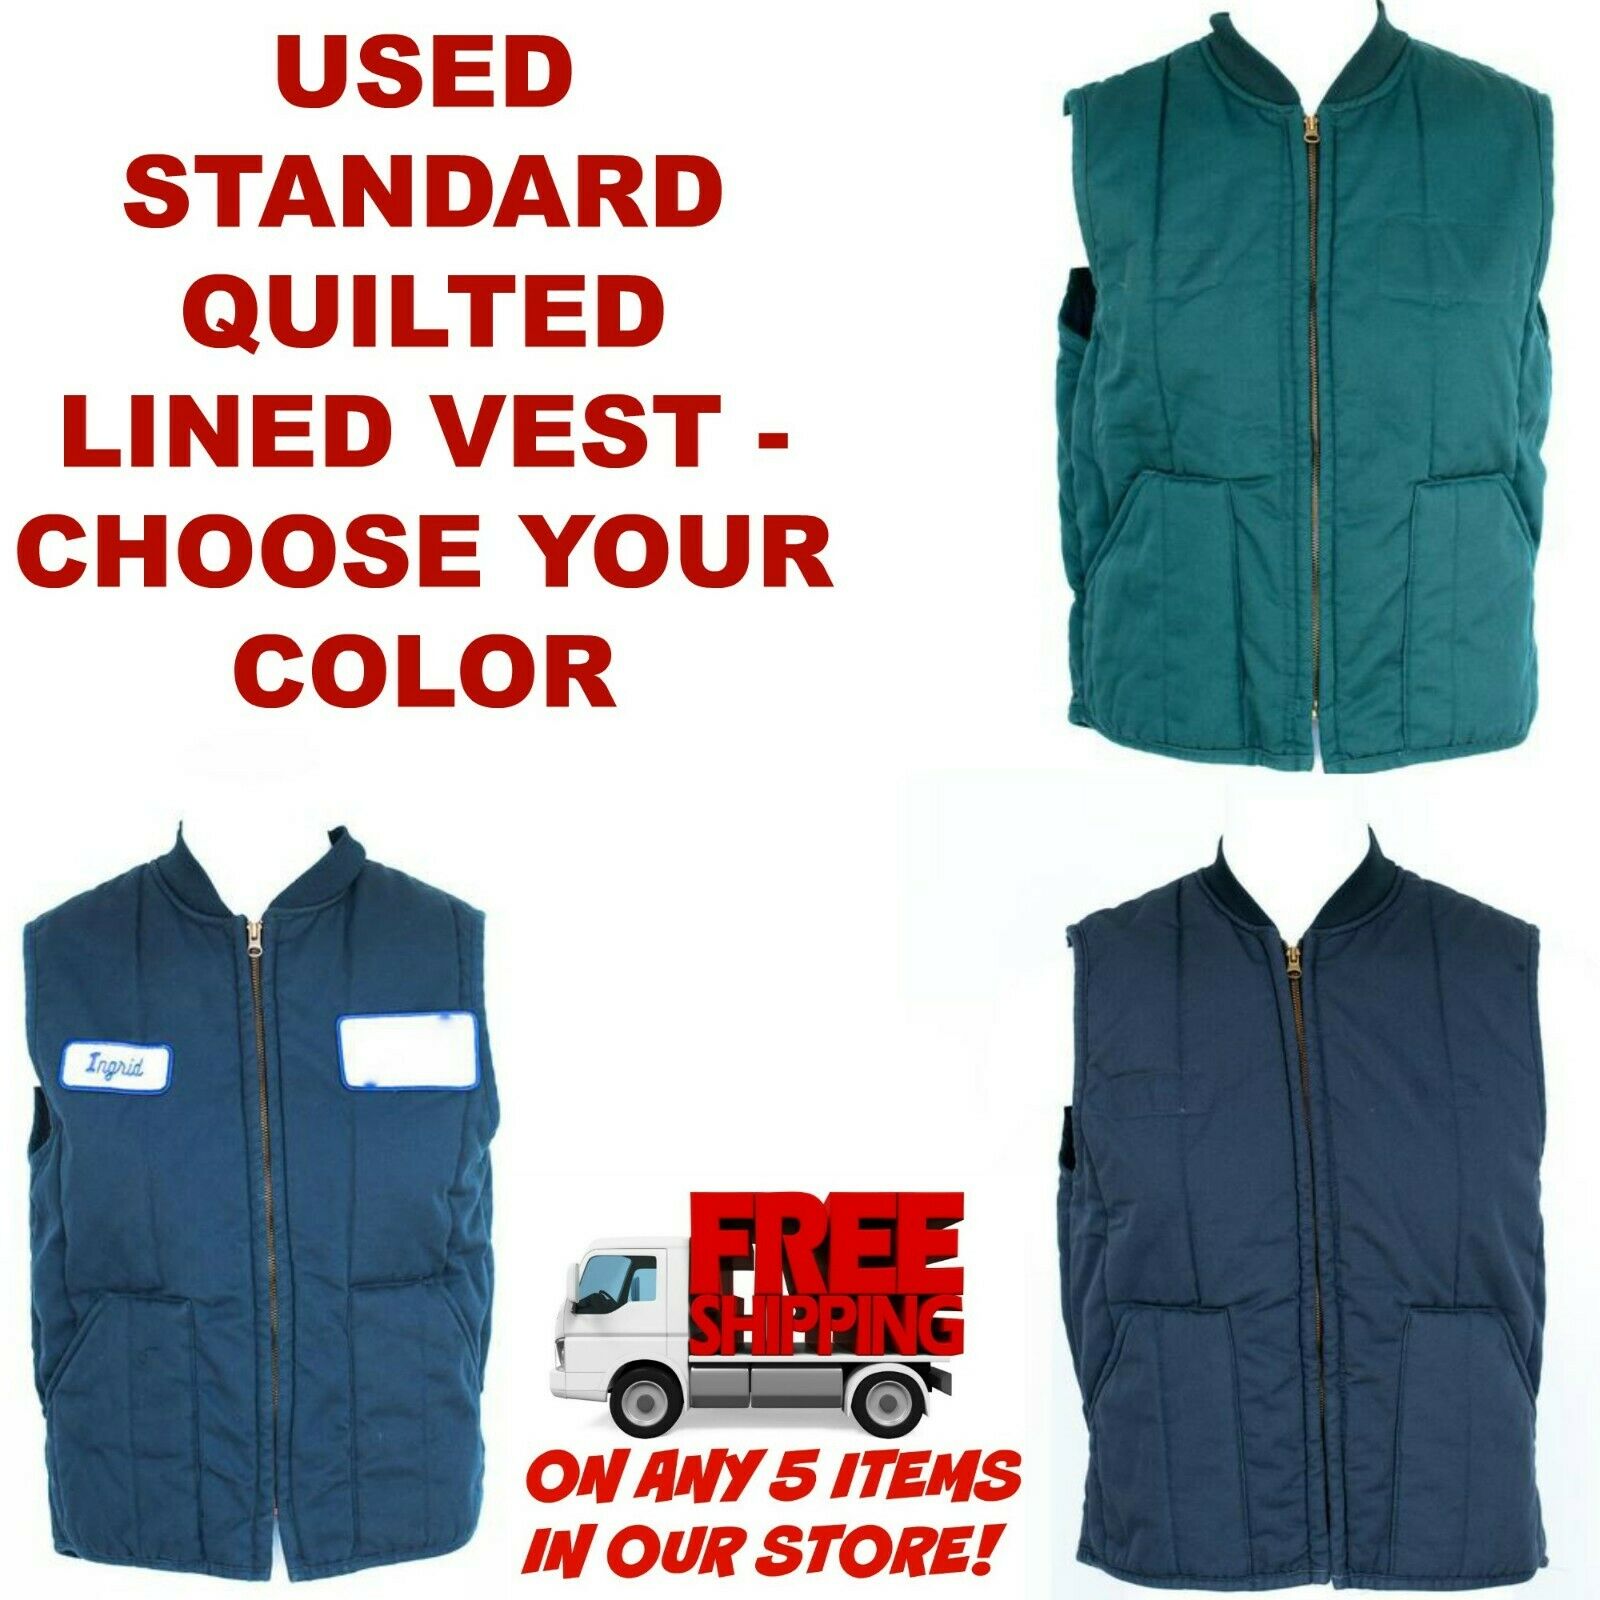 Used Quilted Lined Work Vest Cintas, Unifirst, Redkap, G&k